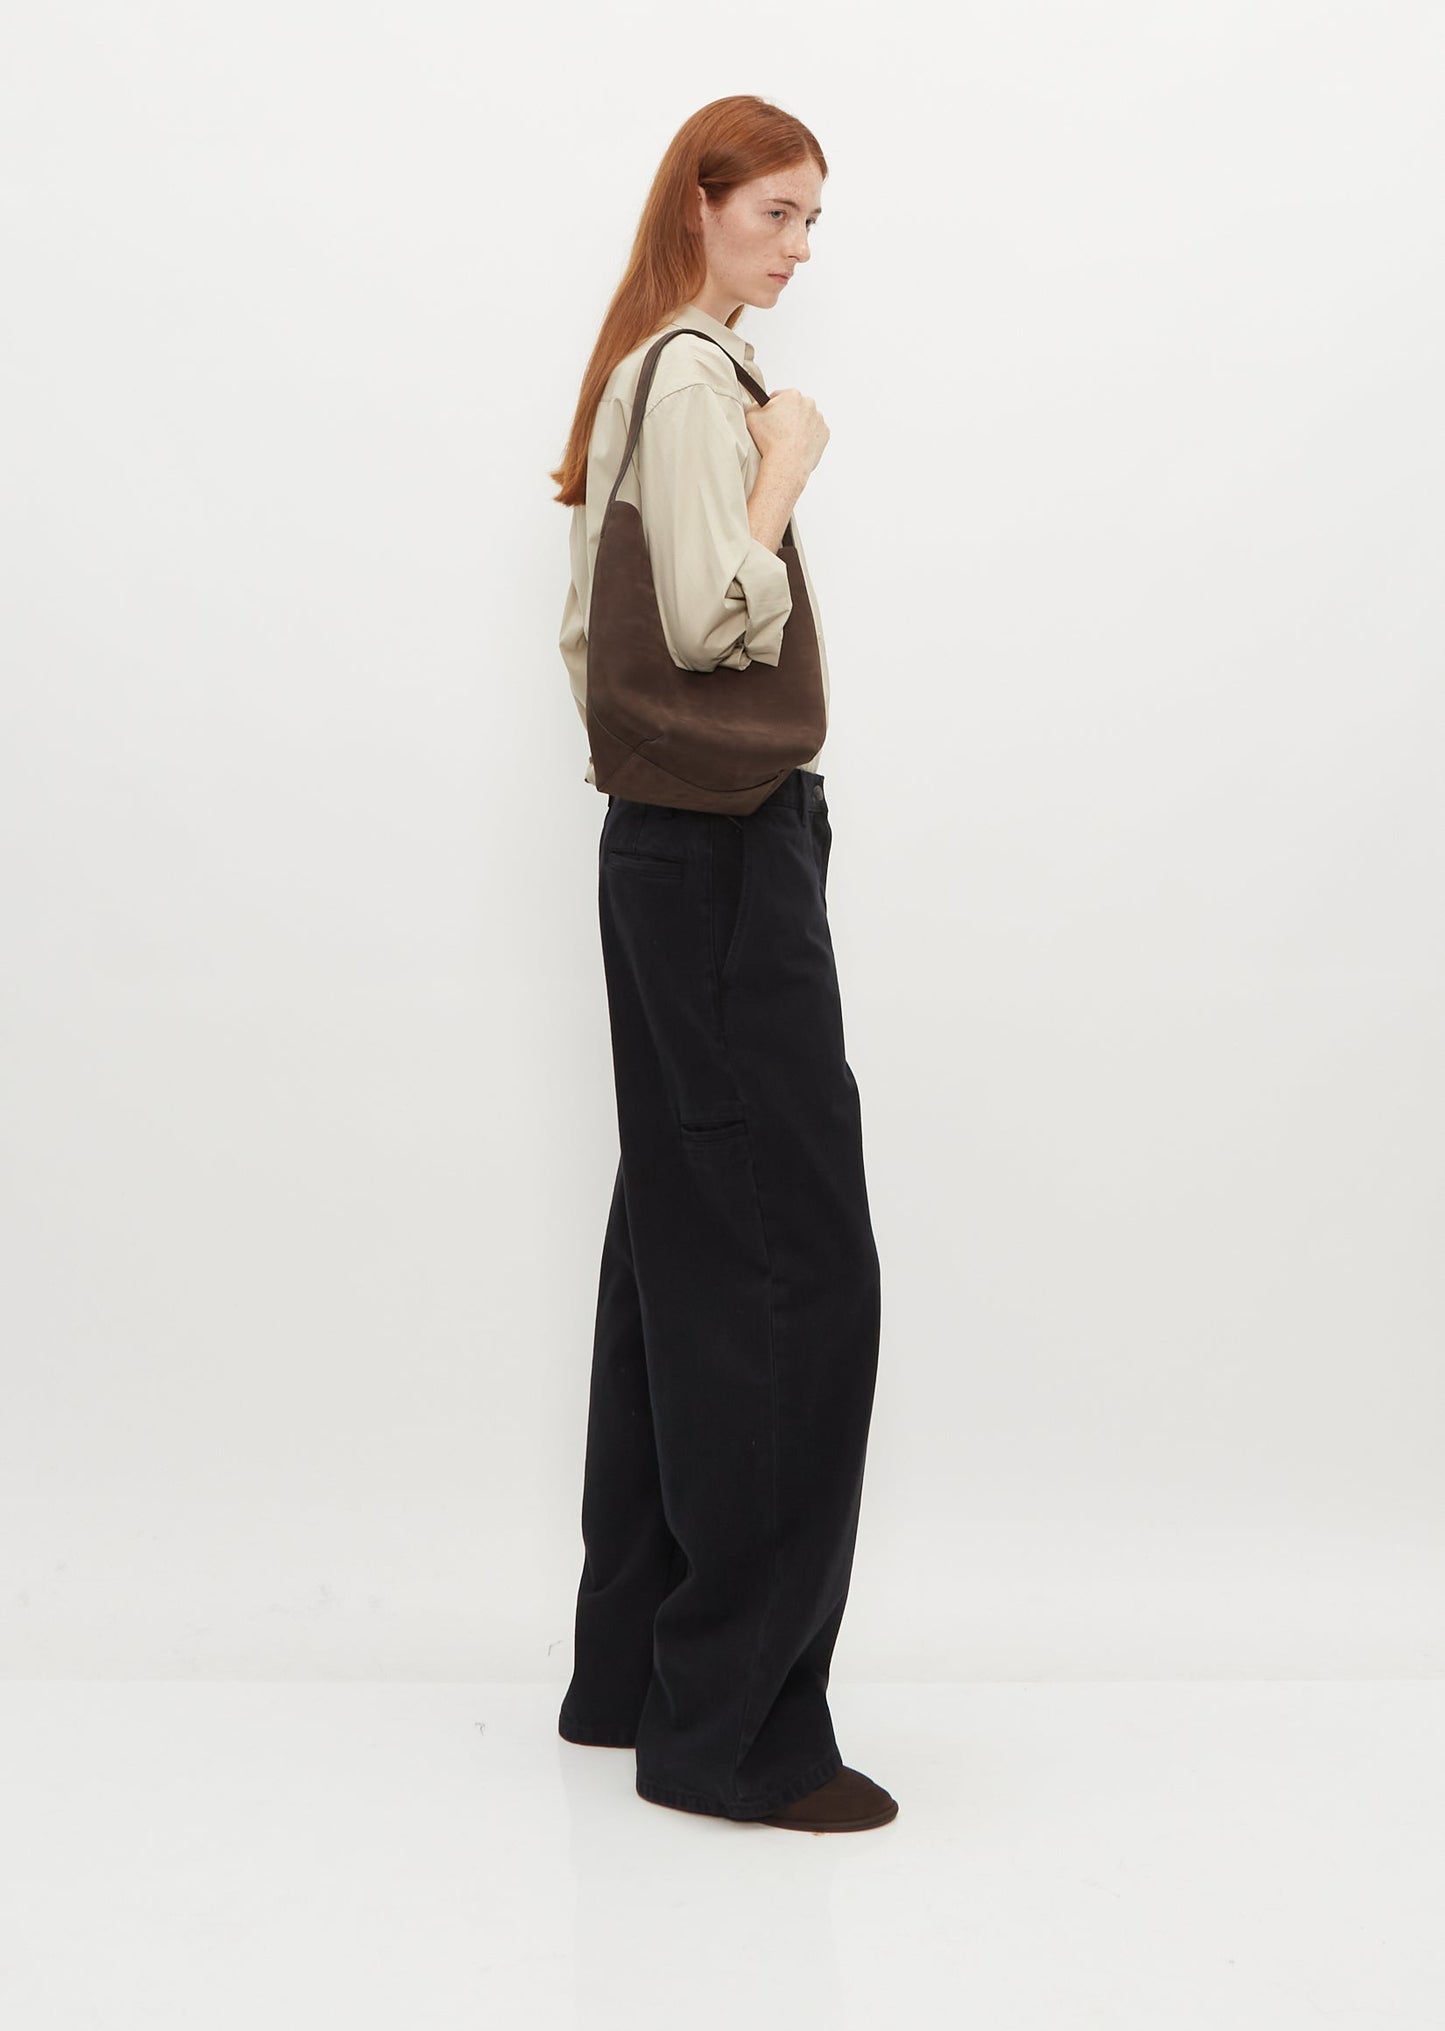 TR N/S Tote Bag Suede - Tundra, Wood